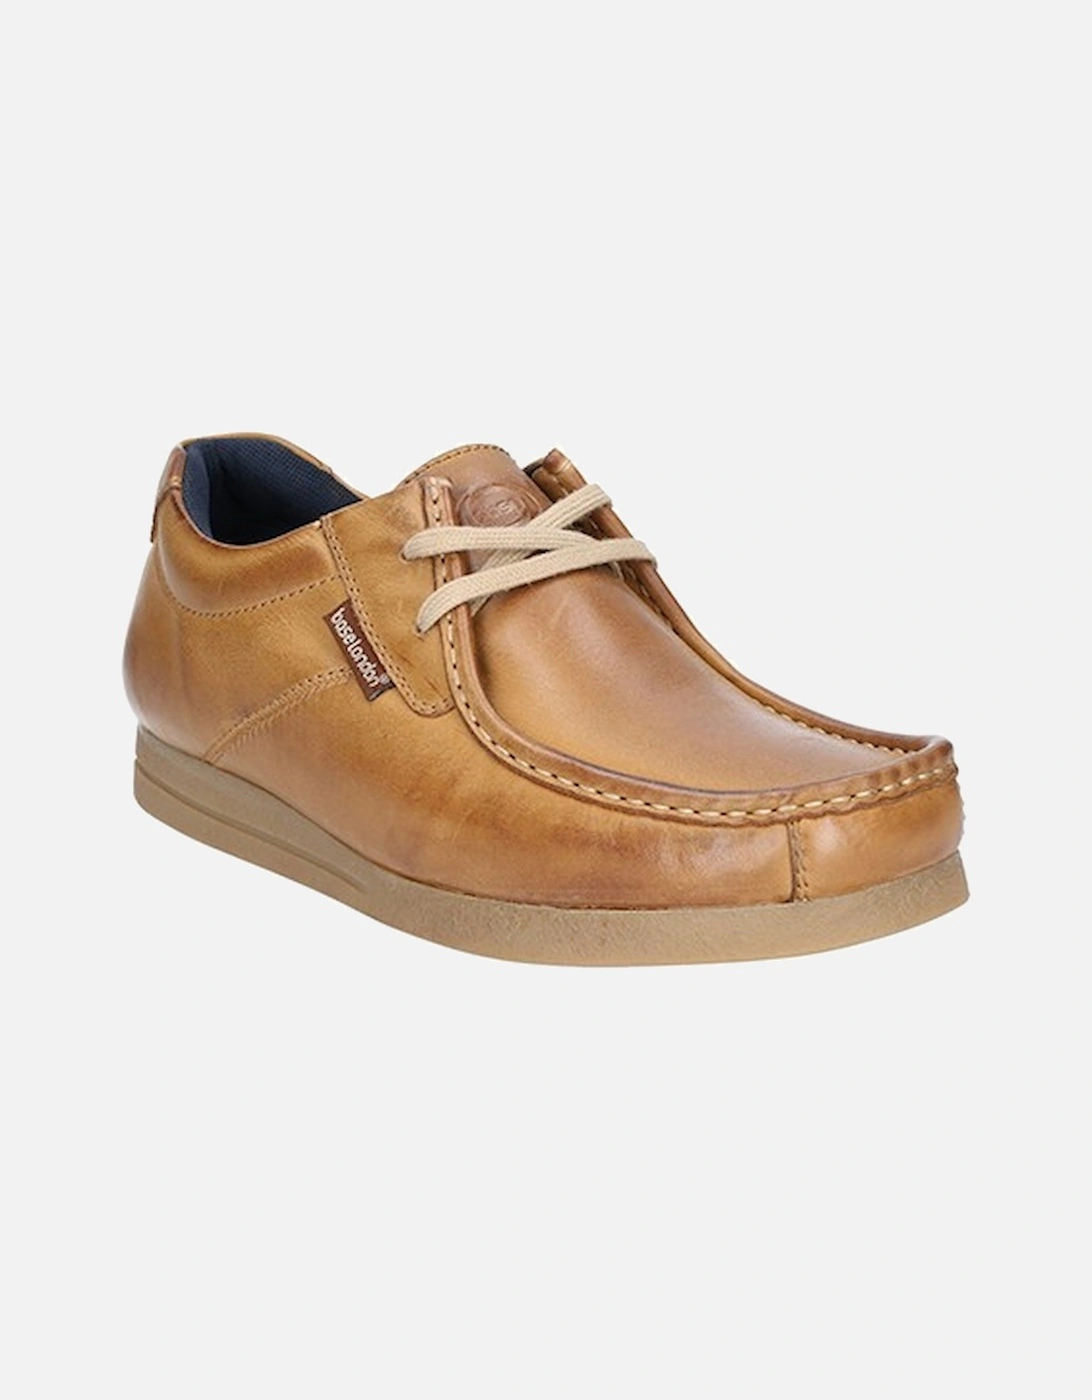 London Men's Event Waxy lace Up Shoe Tan DFS, 5 of 4